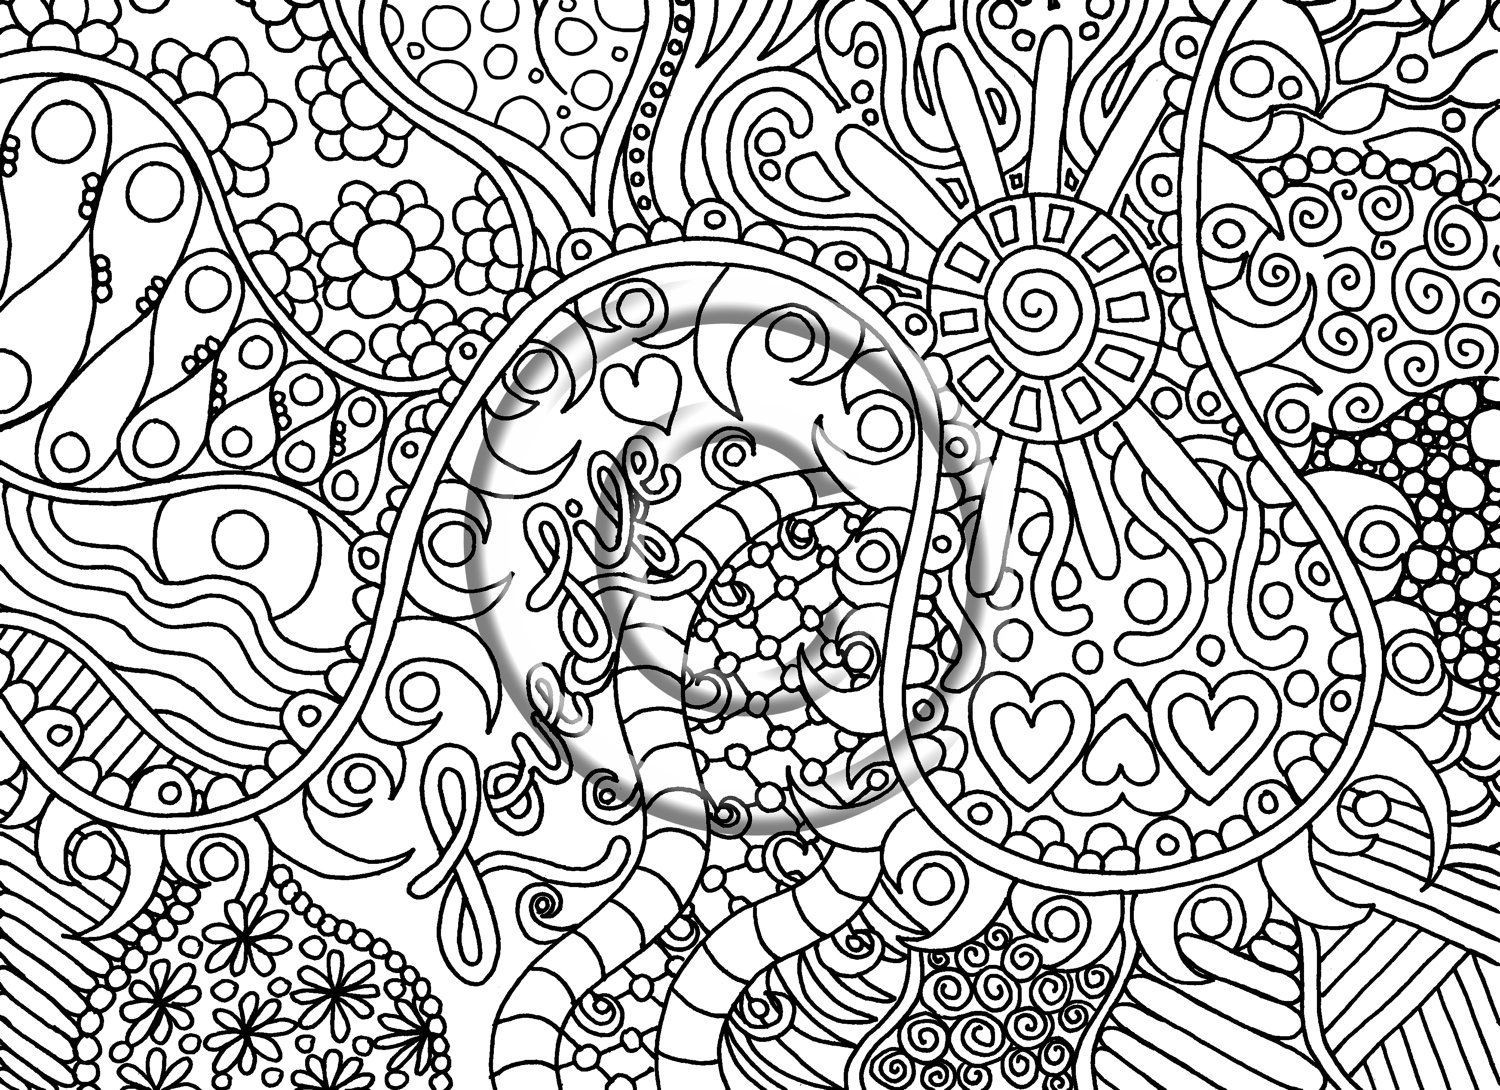 Trippy Coloring Book Pages
 Printable Psychedelic Coloring Pages thekindproject